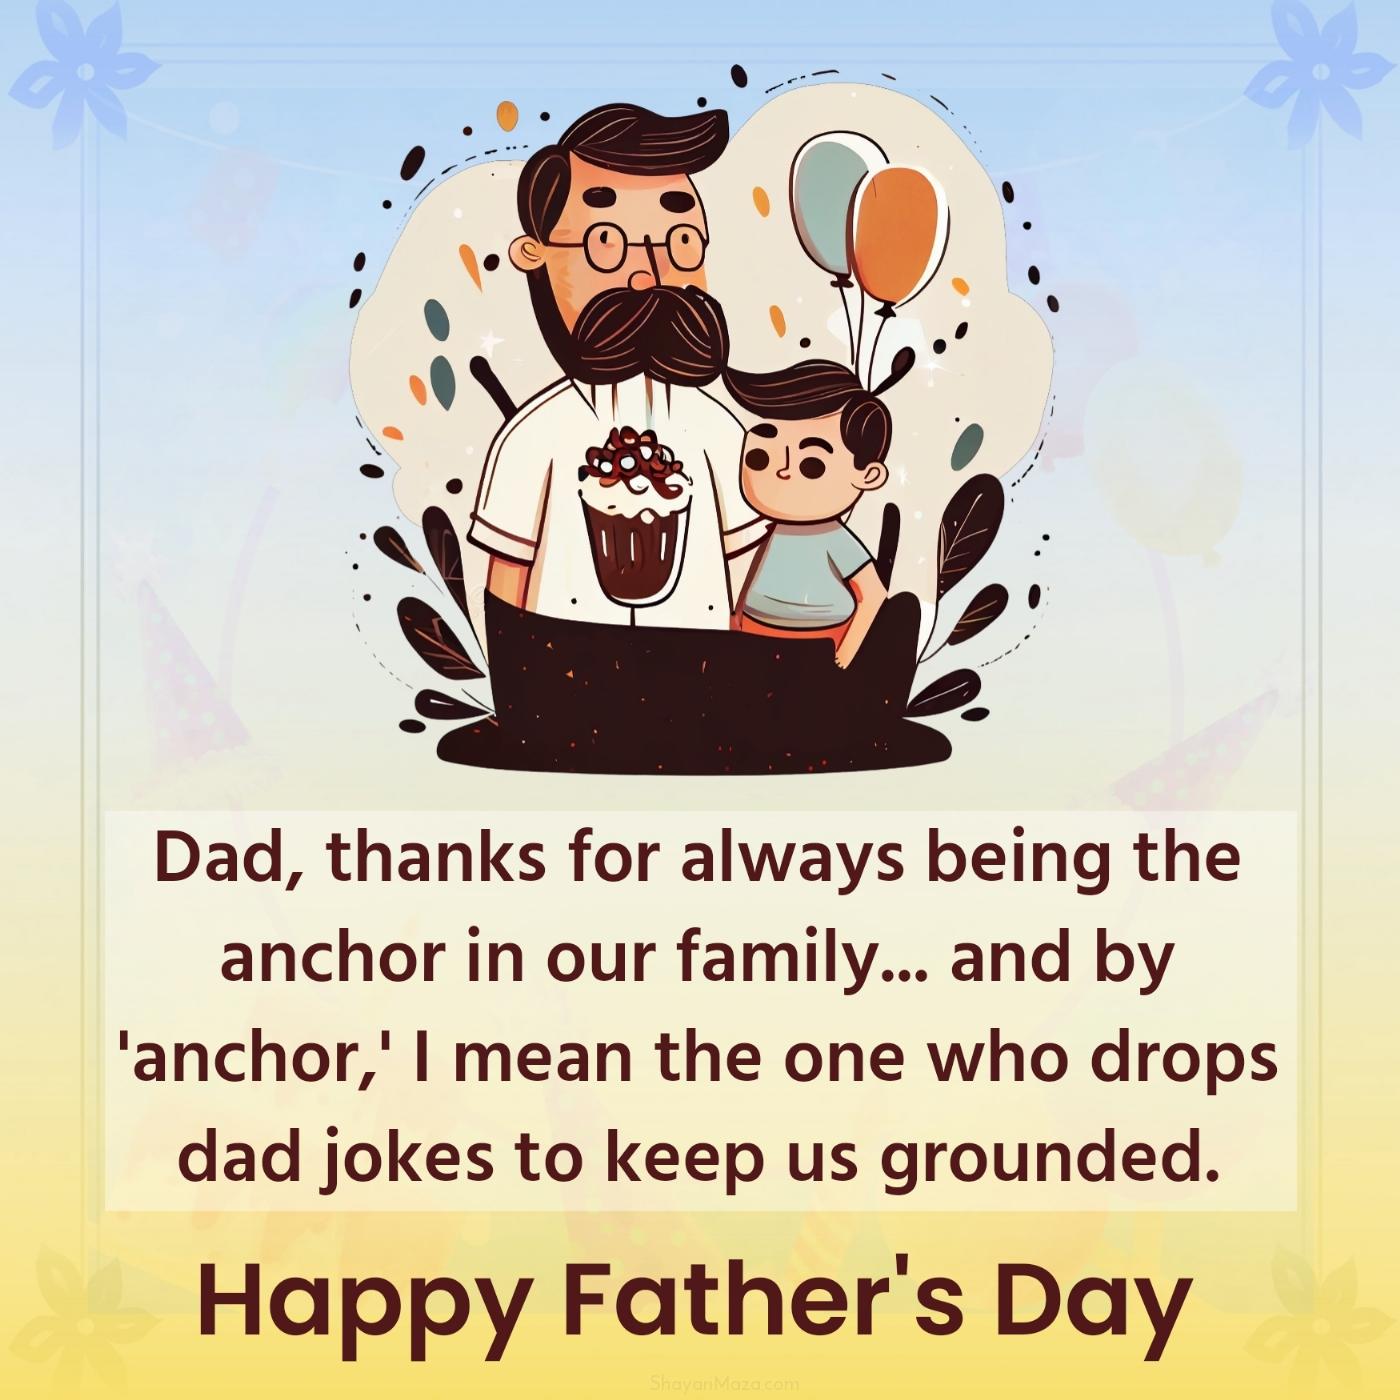 Dad thanks for always being the anchor in our family